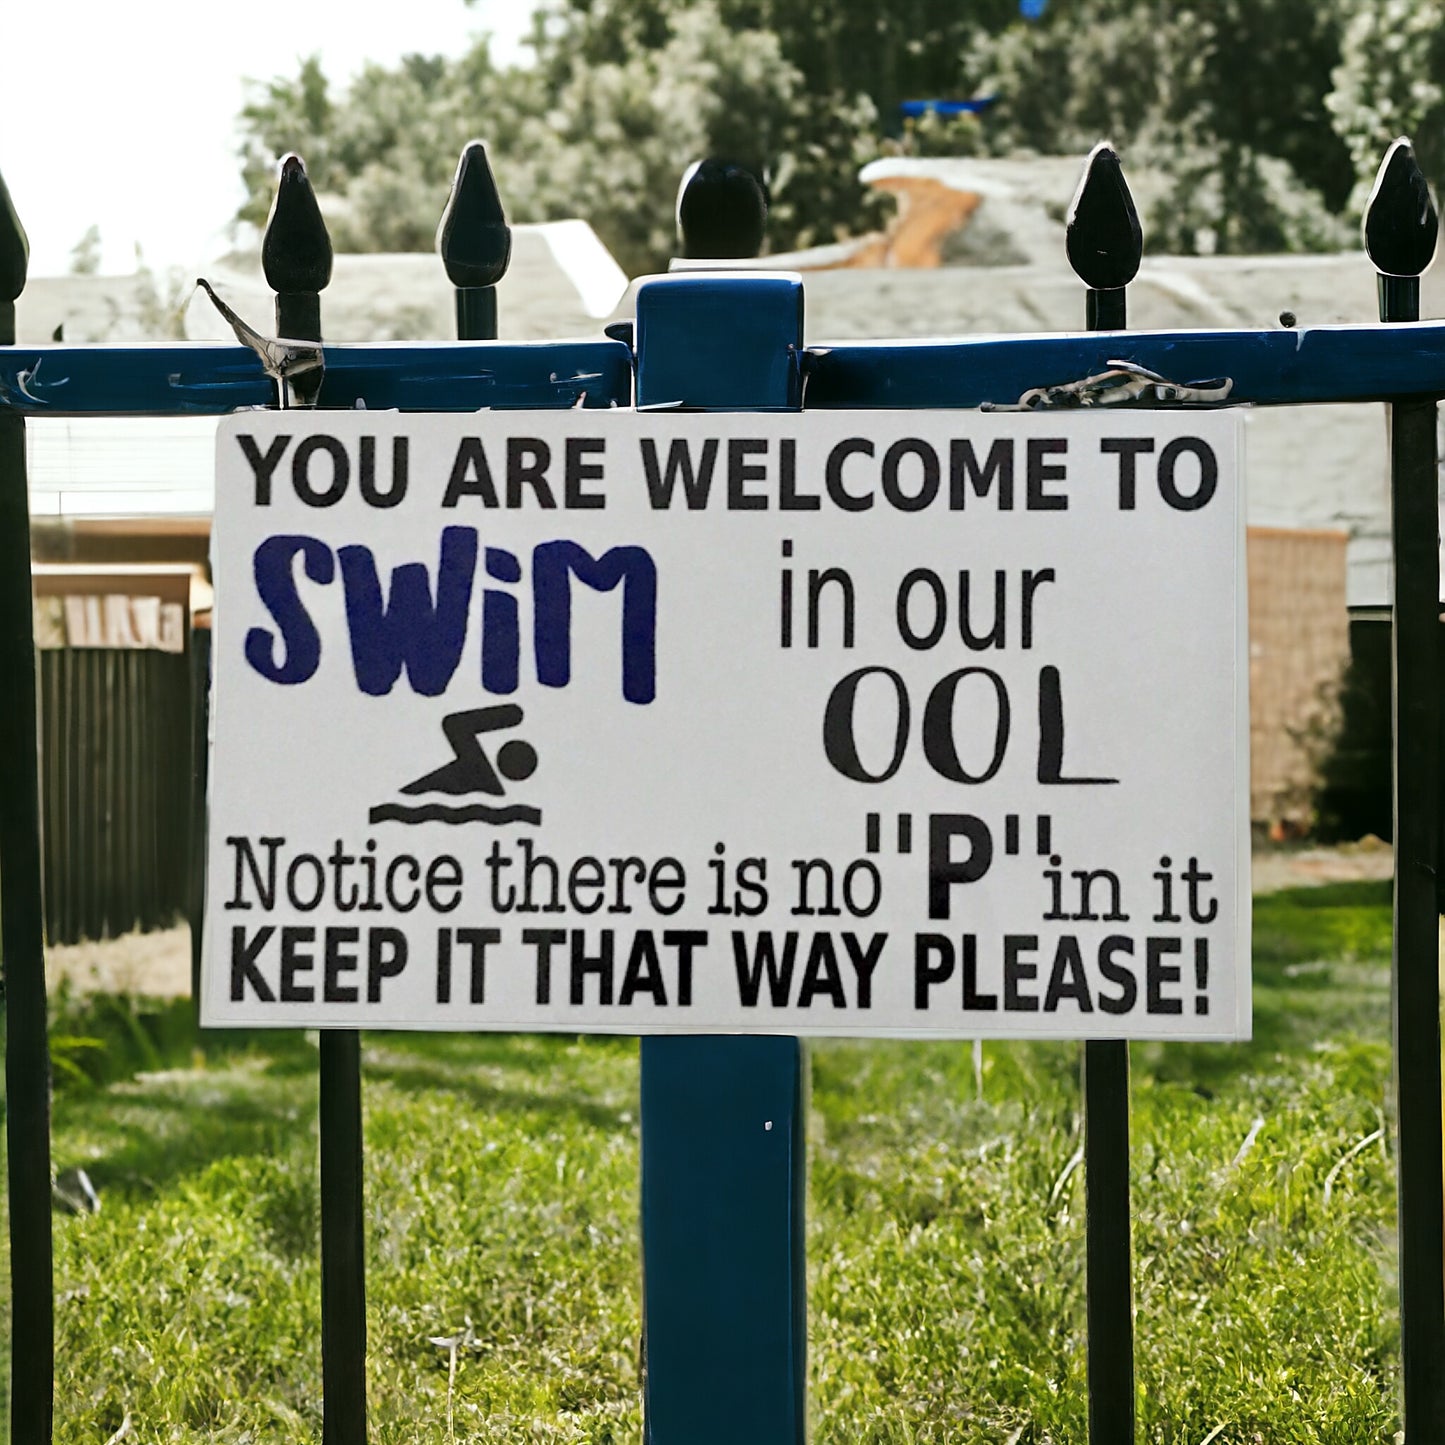 You are welcome to swim in our ool Pool Sign - The Renmy Store Homewares & Gifts 